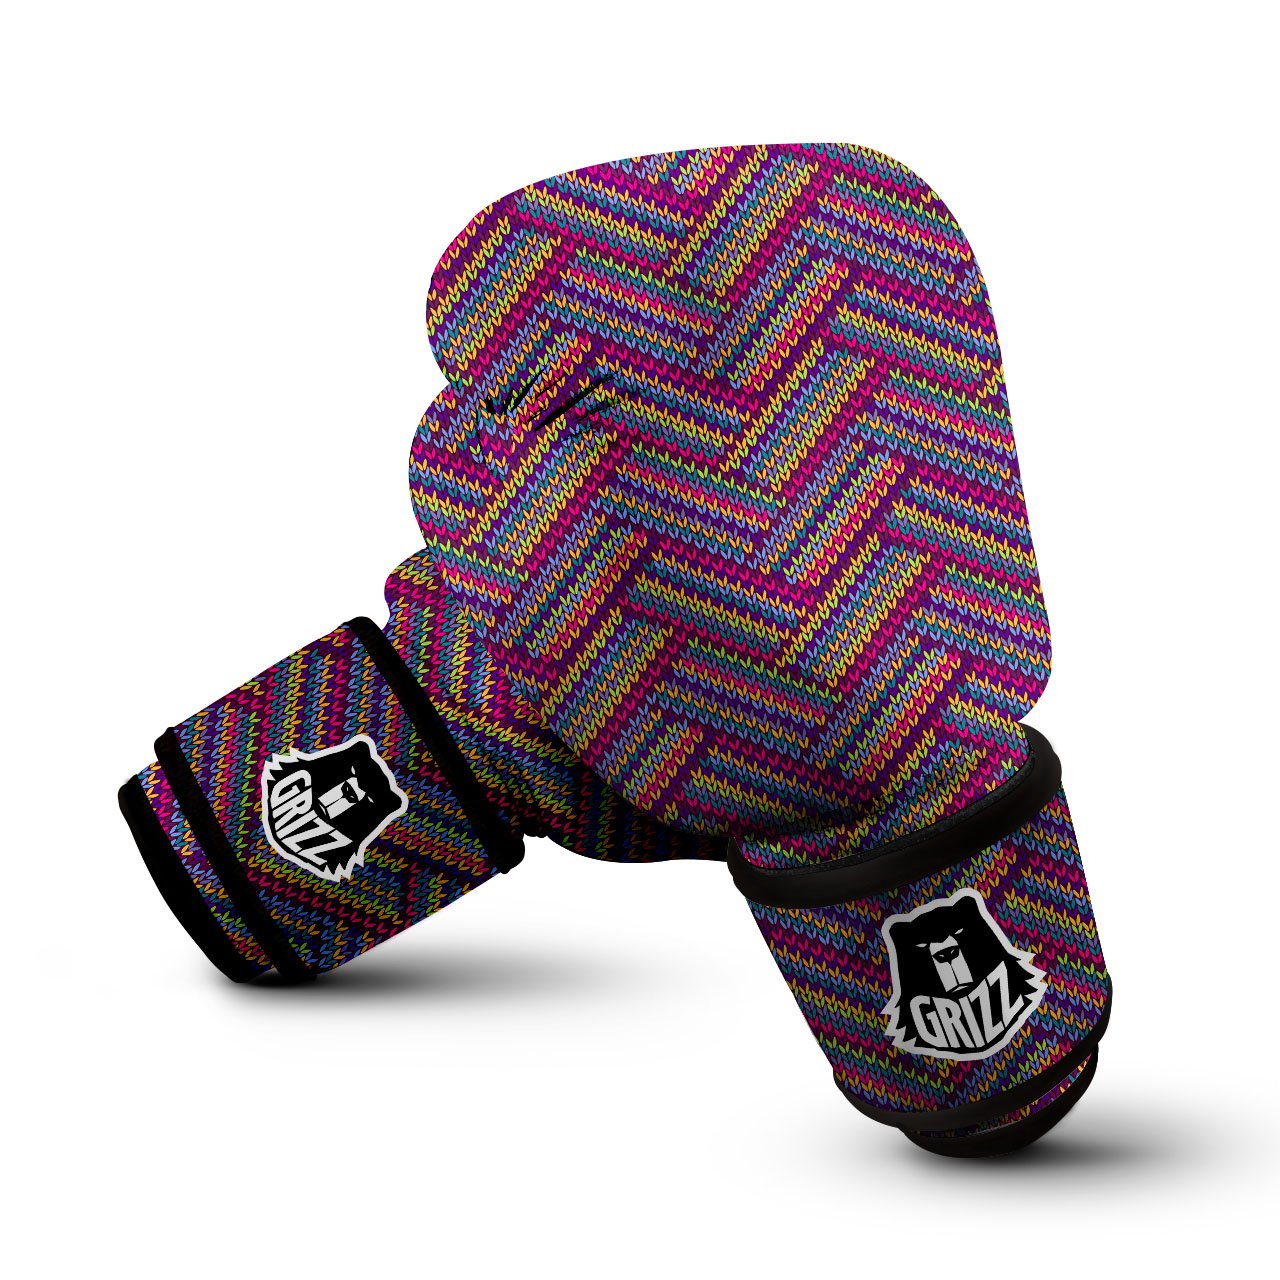 Knitted Vintage Print Pattern Boxing Gloves-grizzshop